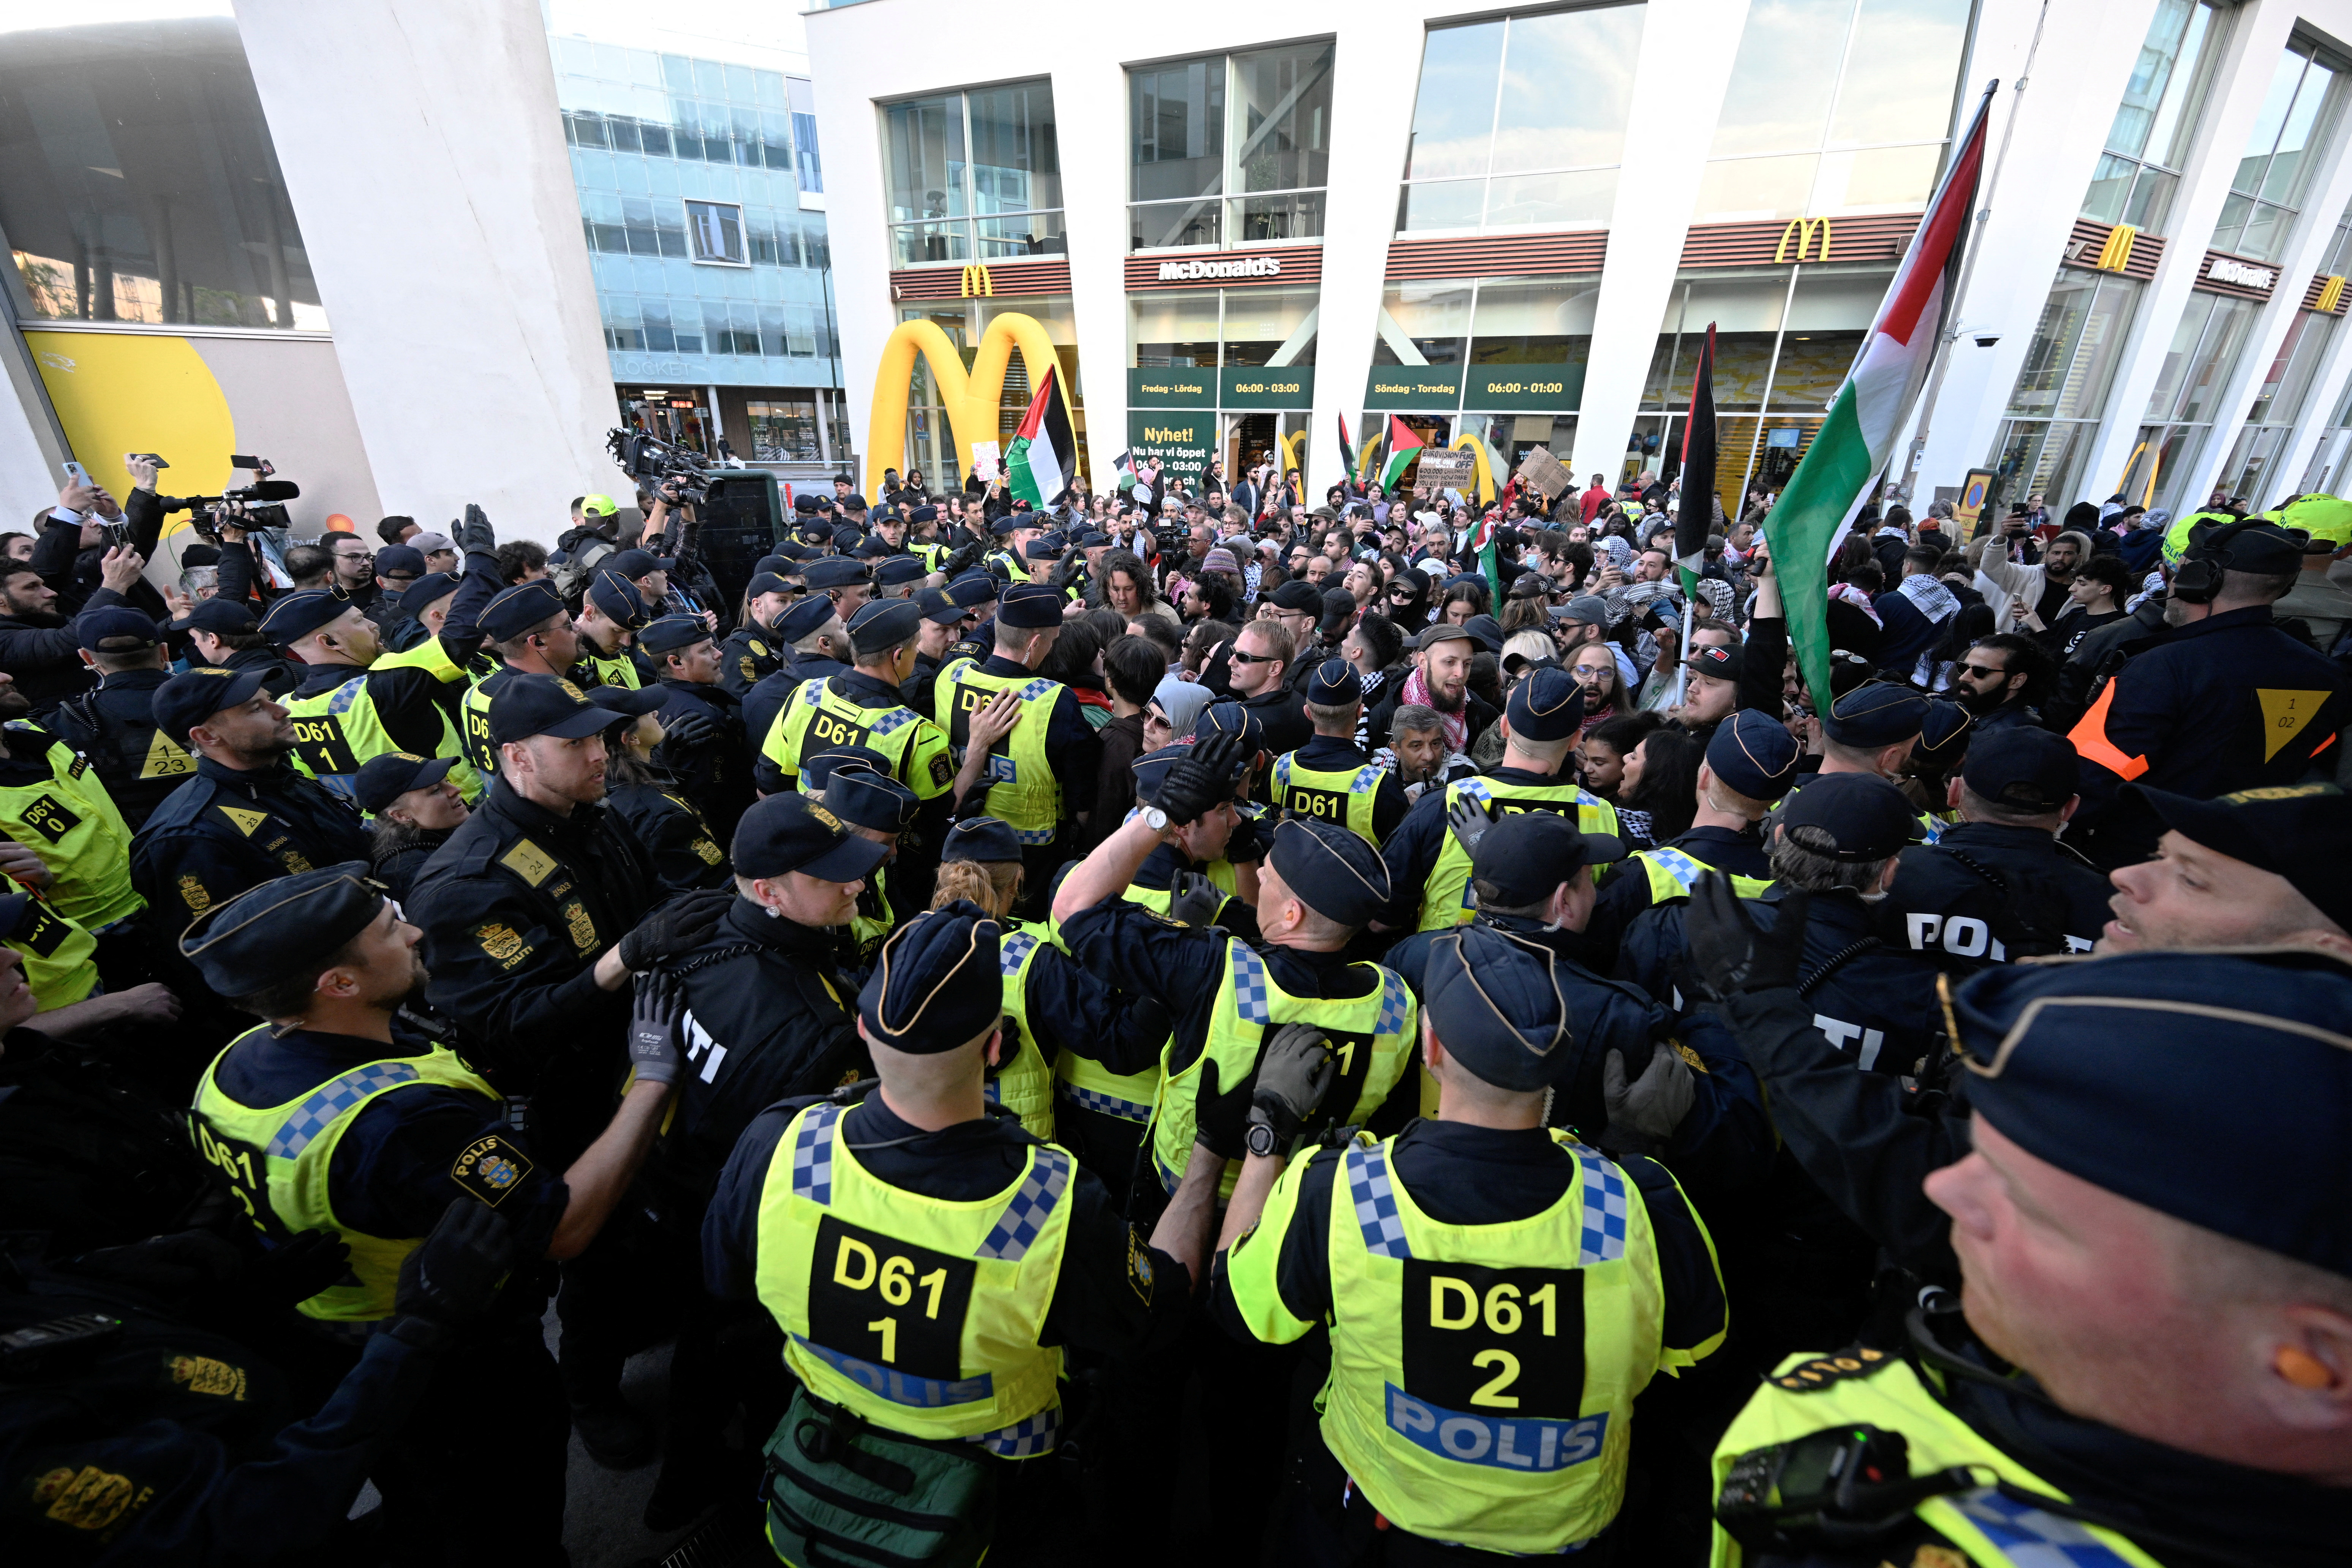 Police officers monitor protesters outside the Eurovision Song Contest. /Johan Nilsson/TT News Agency via Reuters